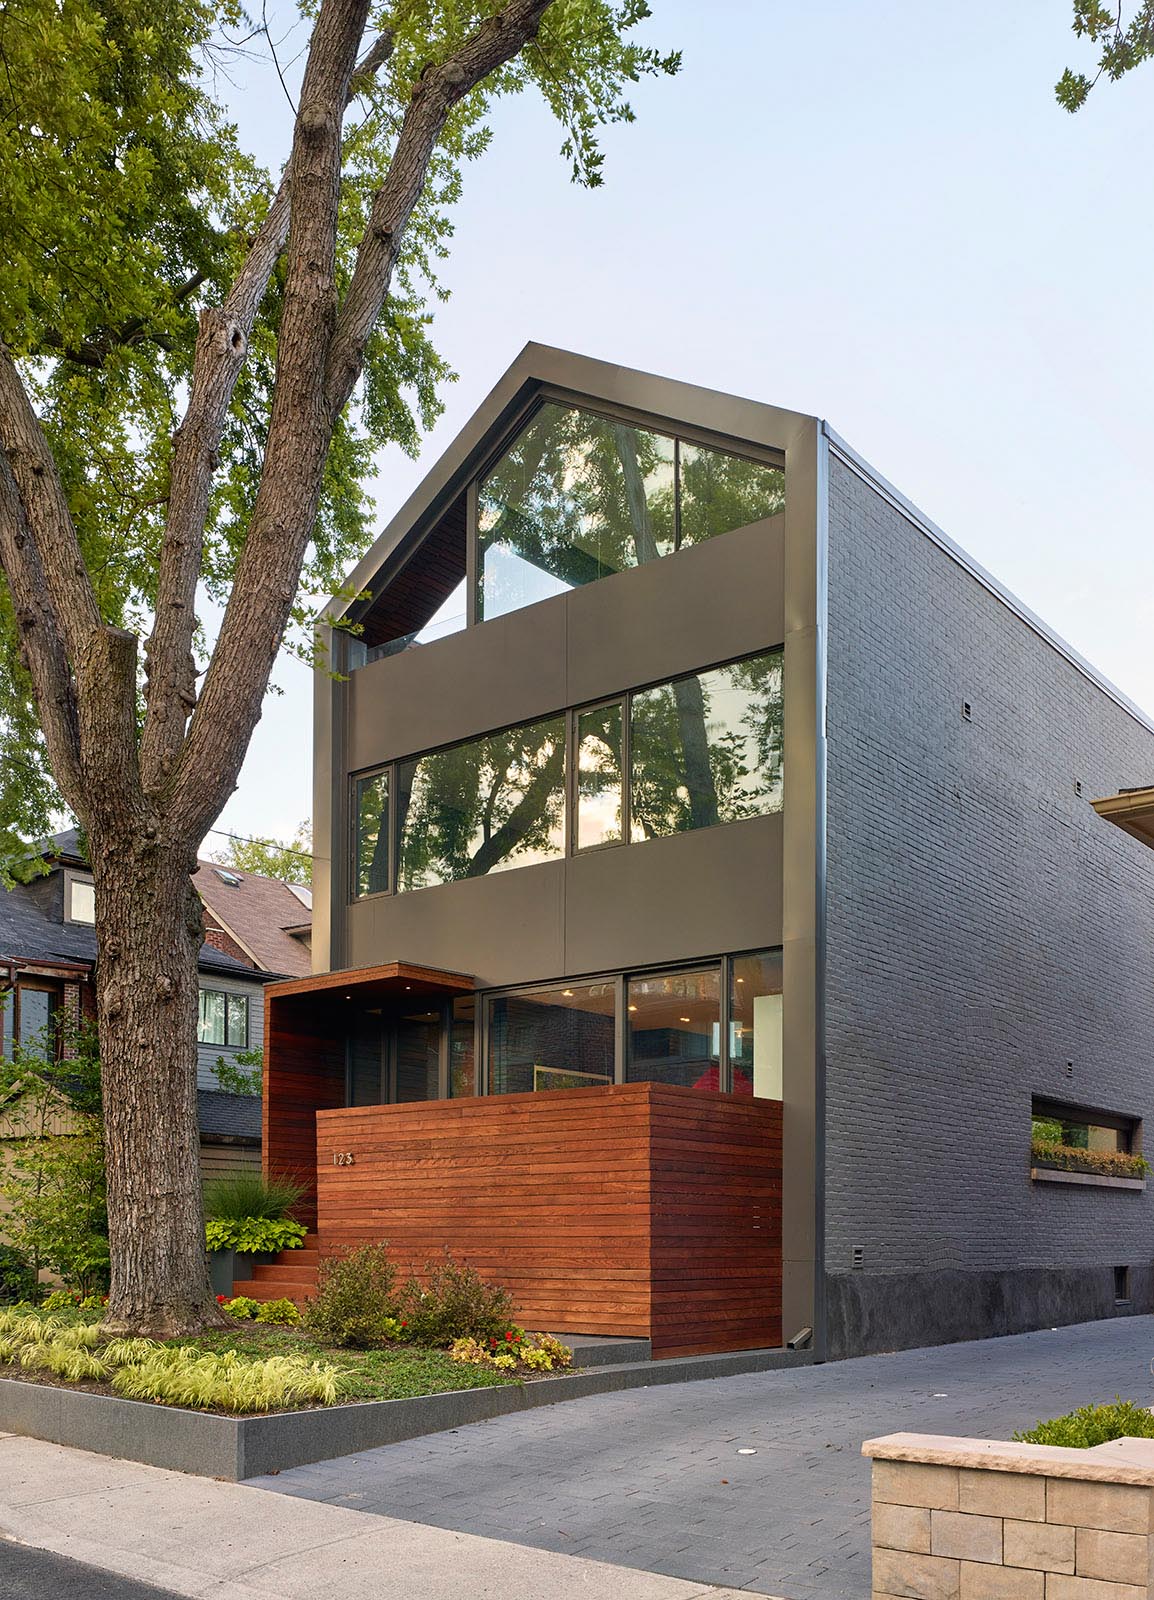 This modern house facade comprises of a combination of windows, doors and spandrel panels, with the windows framing the views to the exterior, bringing natural light and the experience of the changing seasons into the interior.